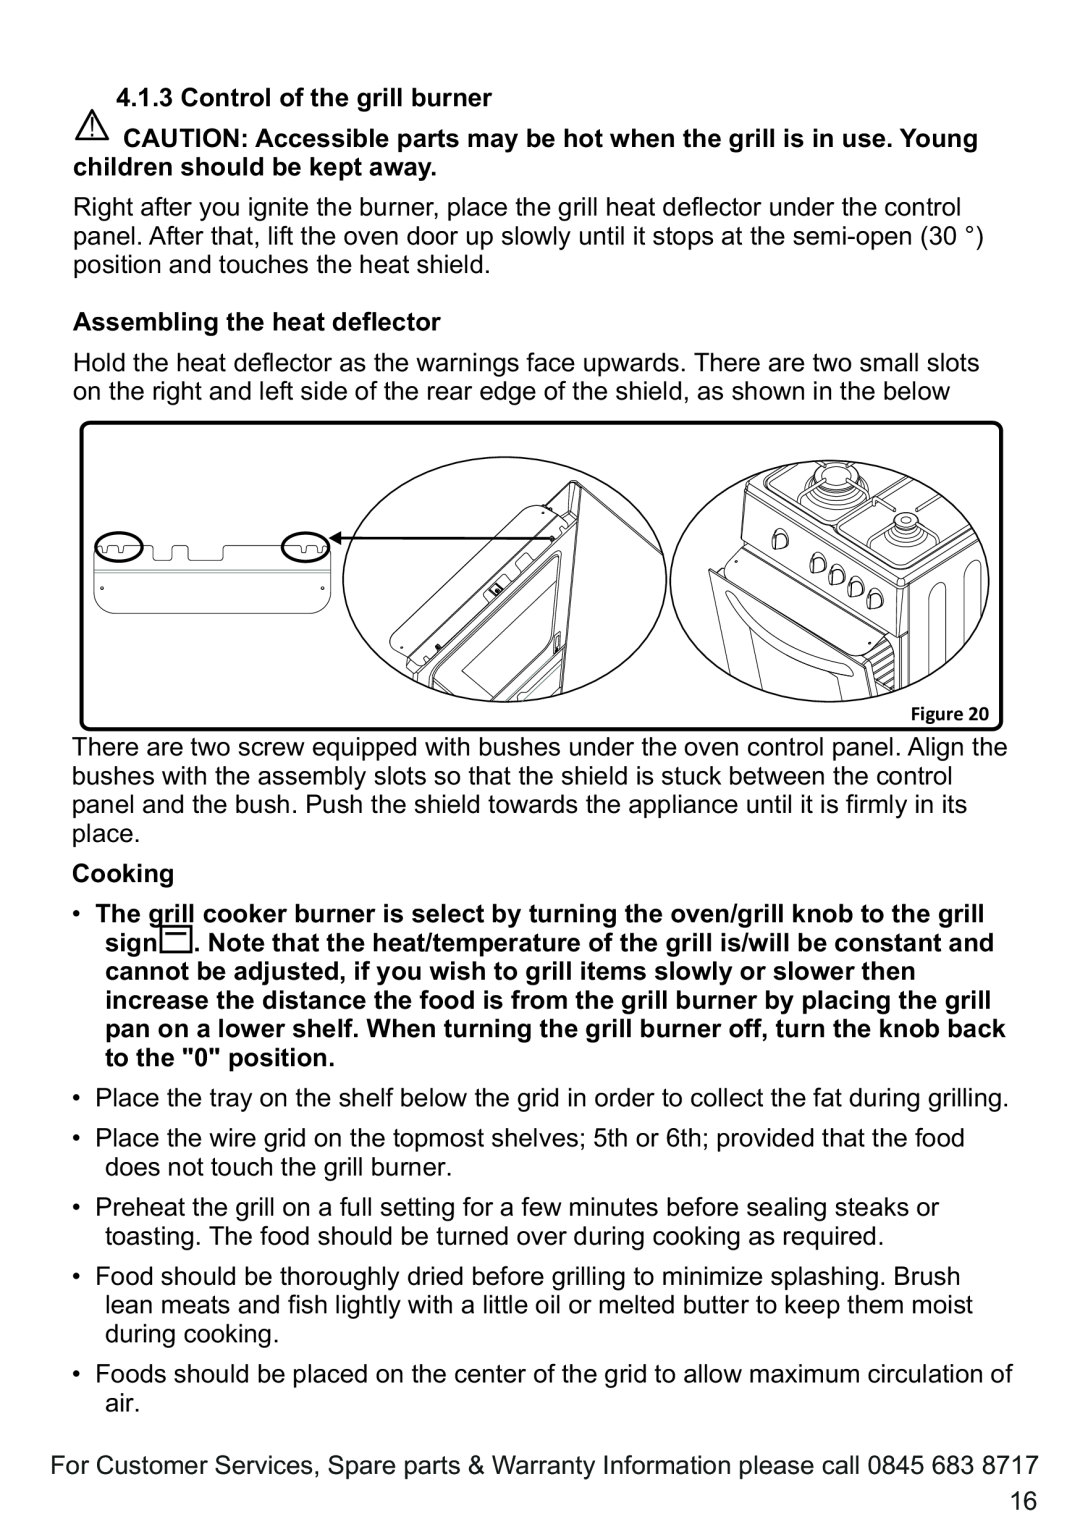 Russell Hobbs RHGC1 instruction manual 4.1.3Control of the grill burner, Assembling the heat deflector, Cooking 